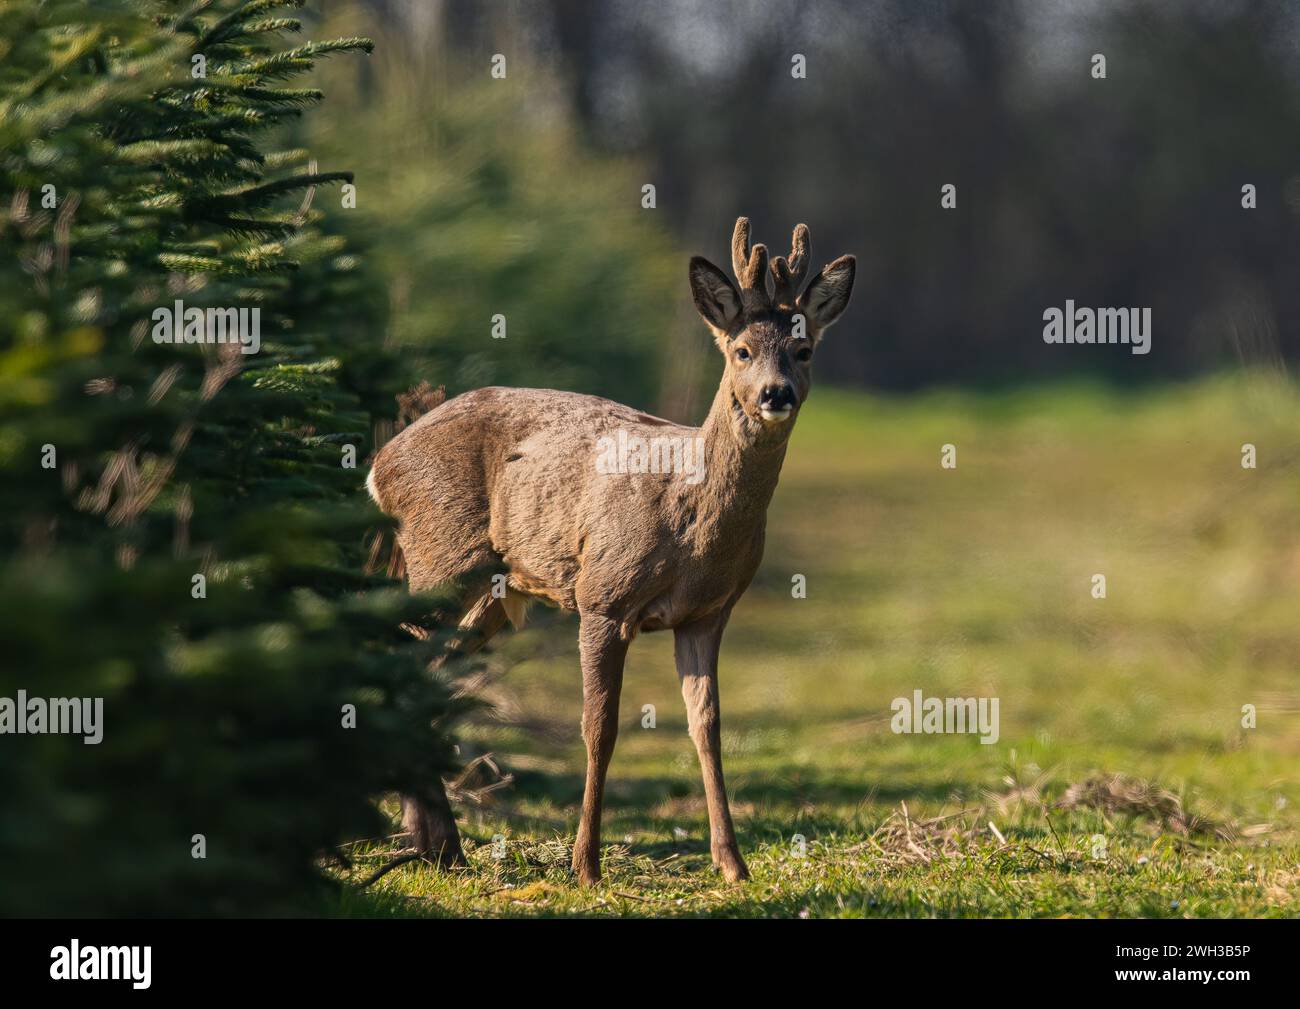 A young Male  Roe Deer (Capreolus capreolus) with antlers in velvet, standing in the sunshine  in a crop of Christmas trees on a Suffolk Farm .  UK. Stock Photo